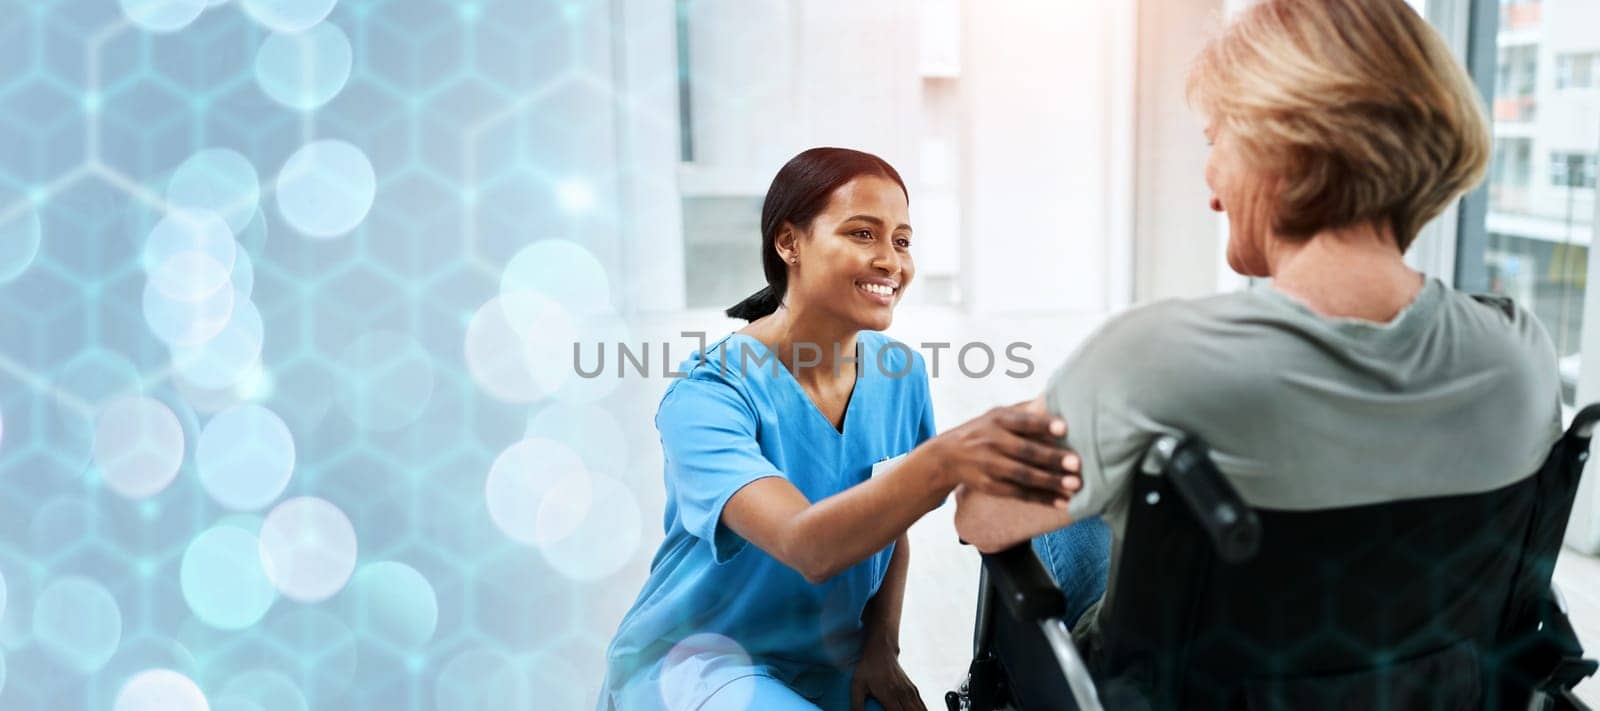 Patient with disability, nurse and discussion in hospital for healthcare, wellness and medicare. Medical professional, bokeh and overlay in mockup, marketing and advertising for trust in advice.